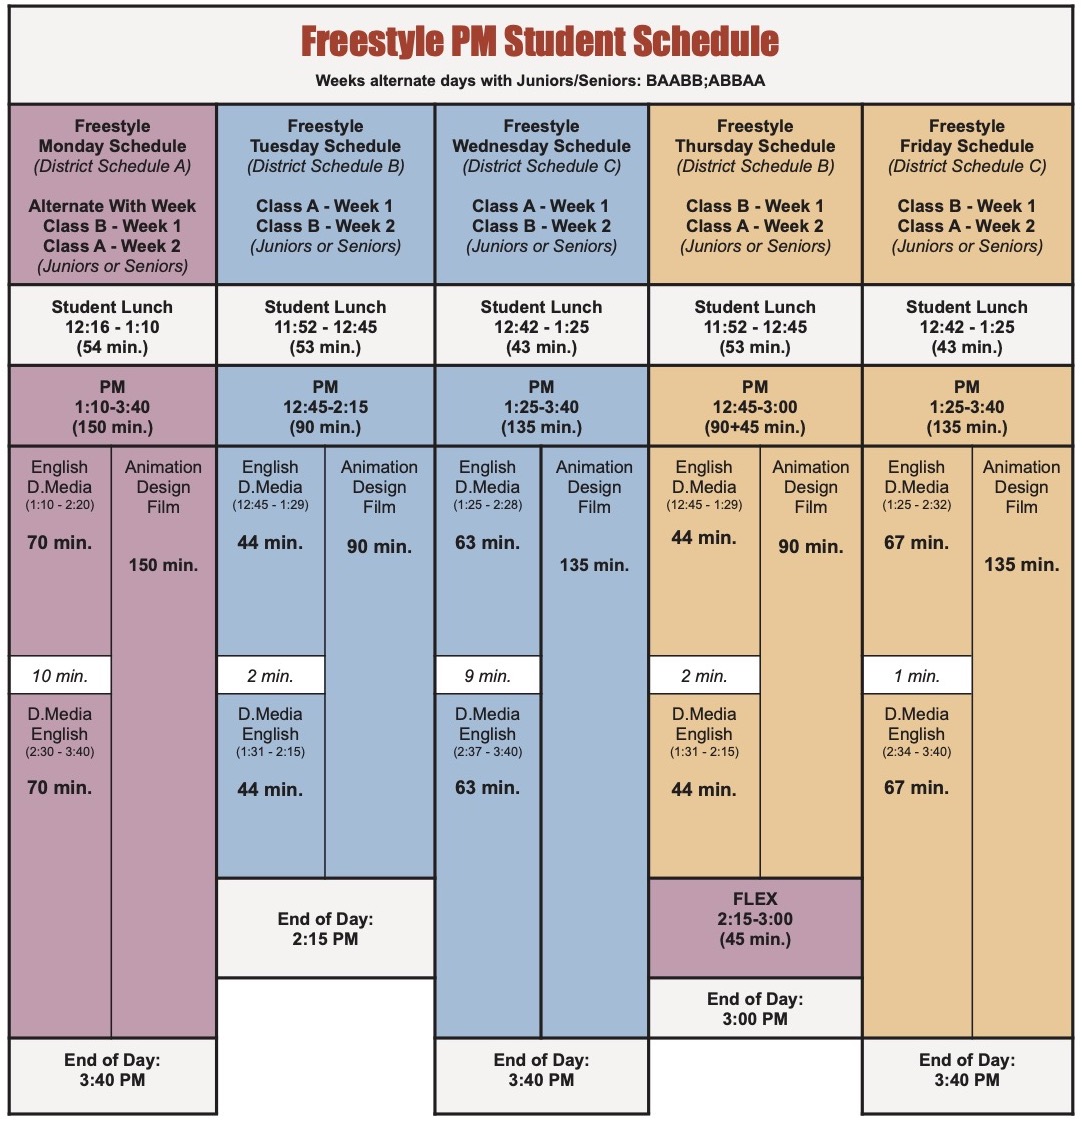 Freestyle PM Student Schedule